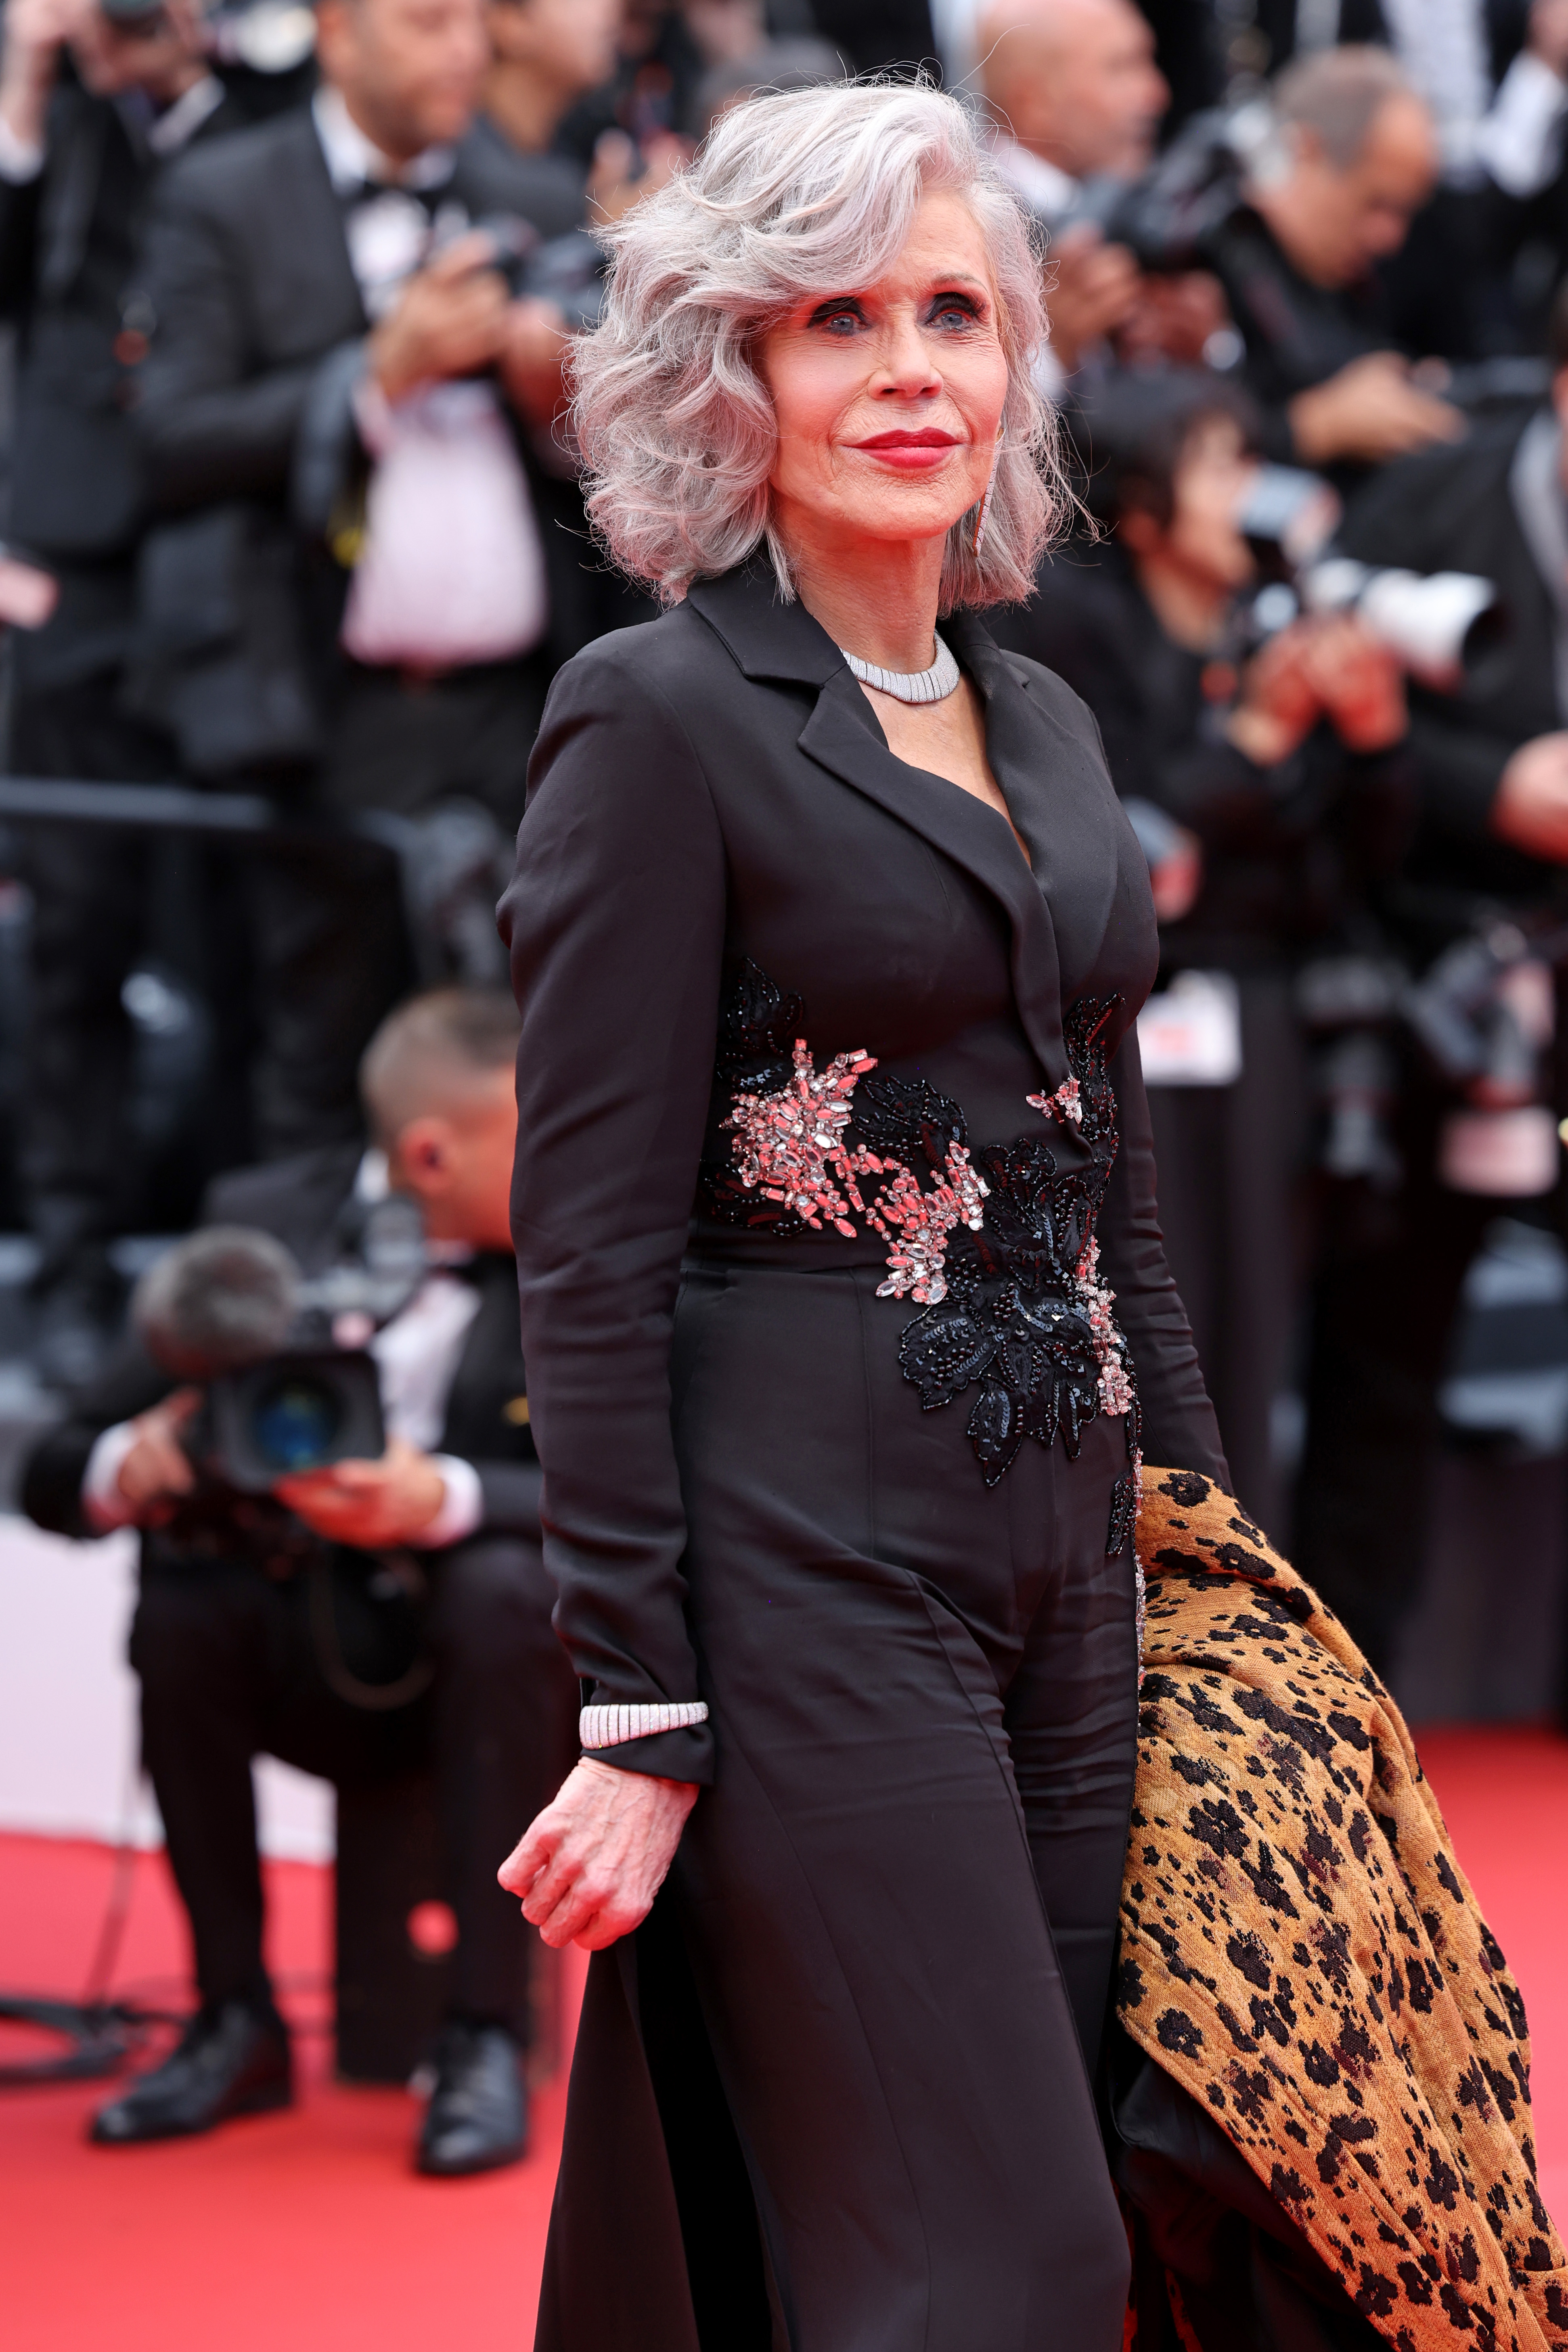 Jane Fonda at the "Le Deuxième Acte" ("The Second Act") screening & opening ceremony red carpet at the 77th annual Cannes Film Festival at Palais des Festivals on May 14, 2024 in Cannes, France | Source: Getty Images